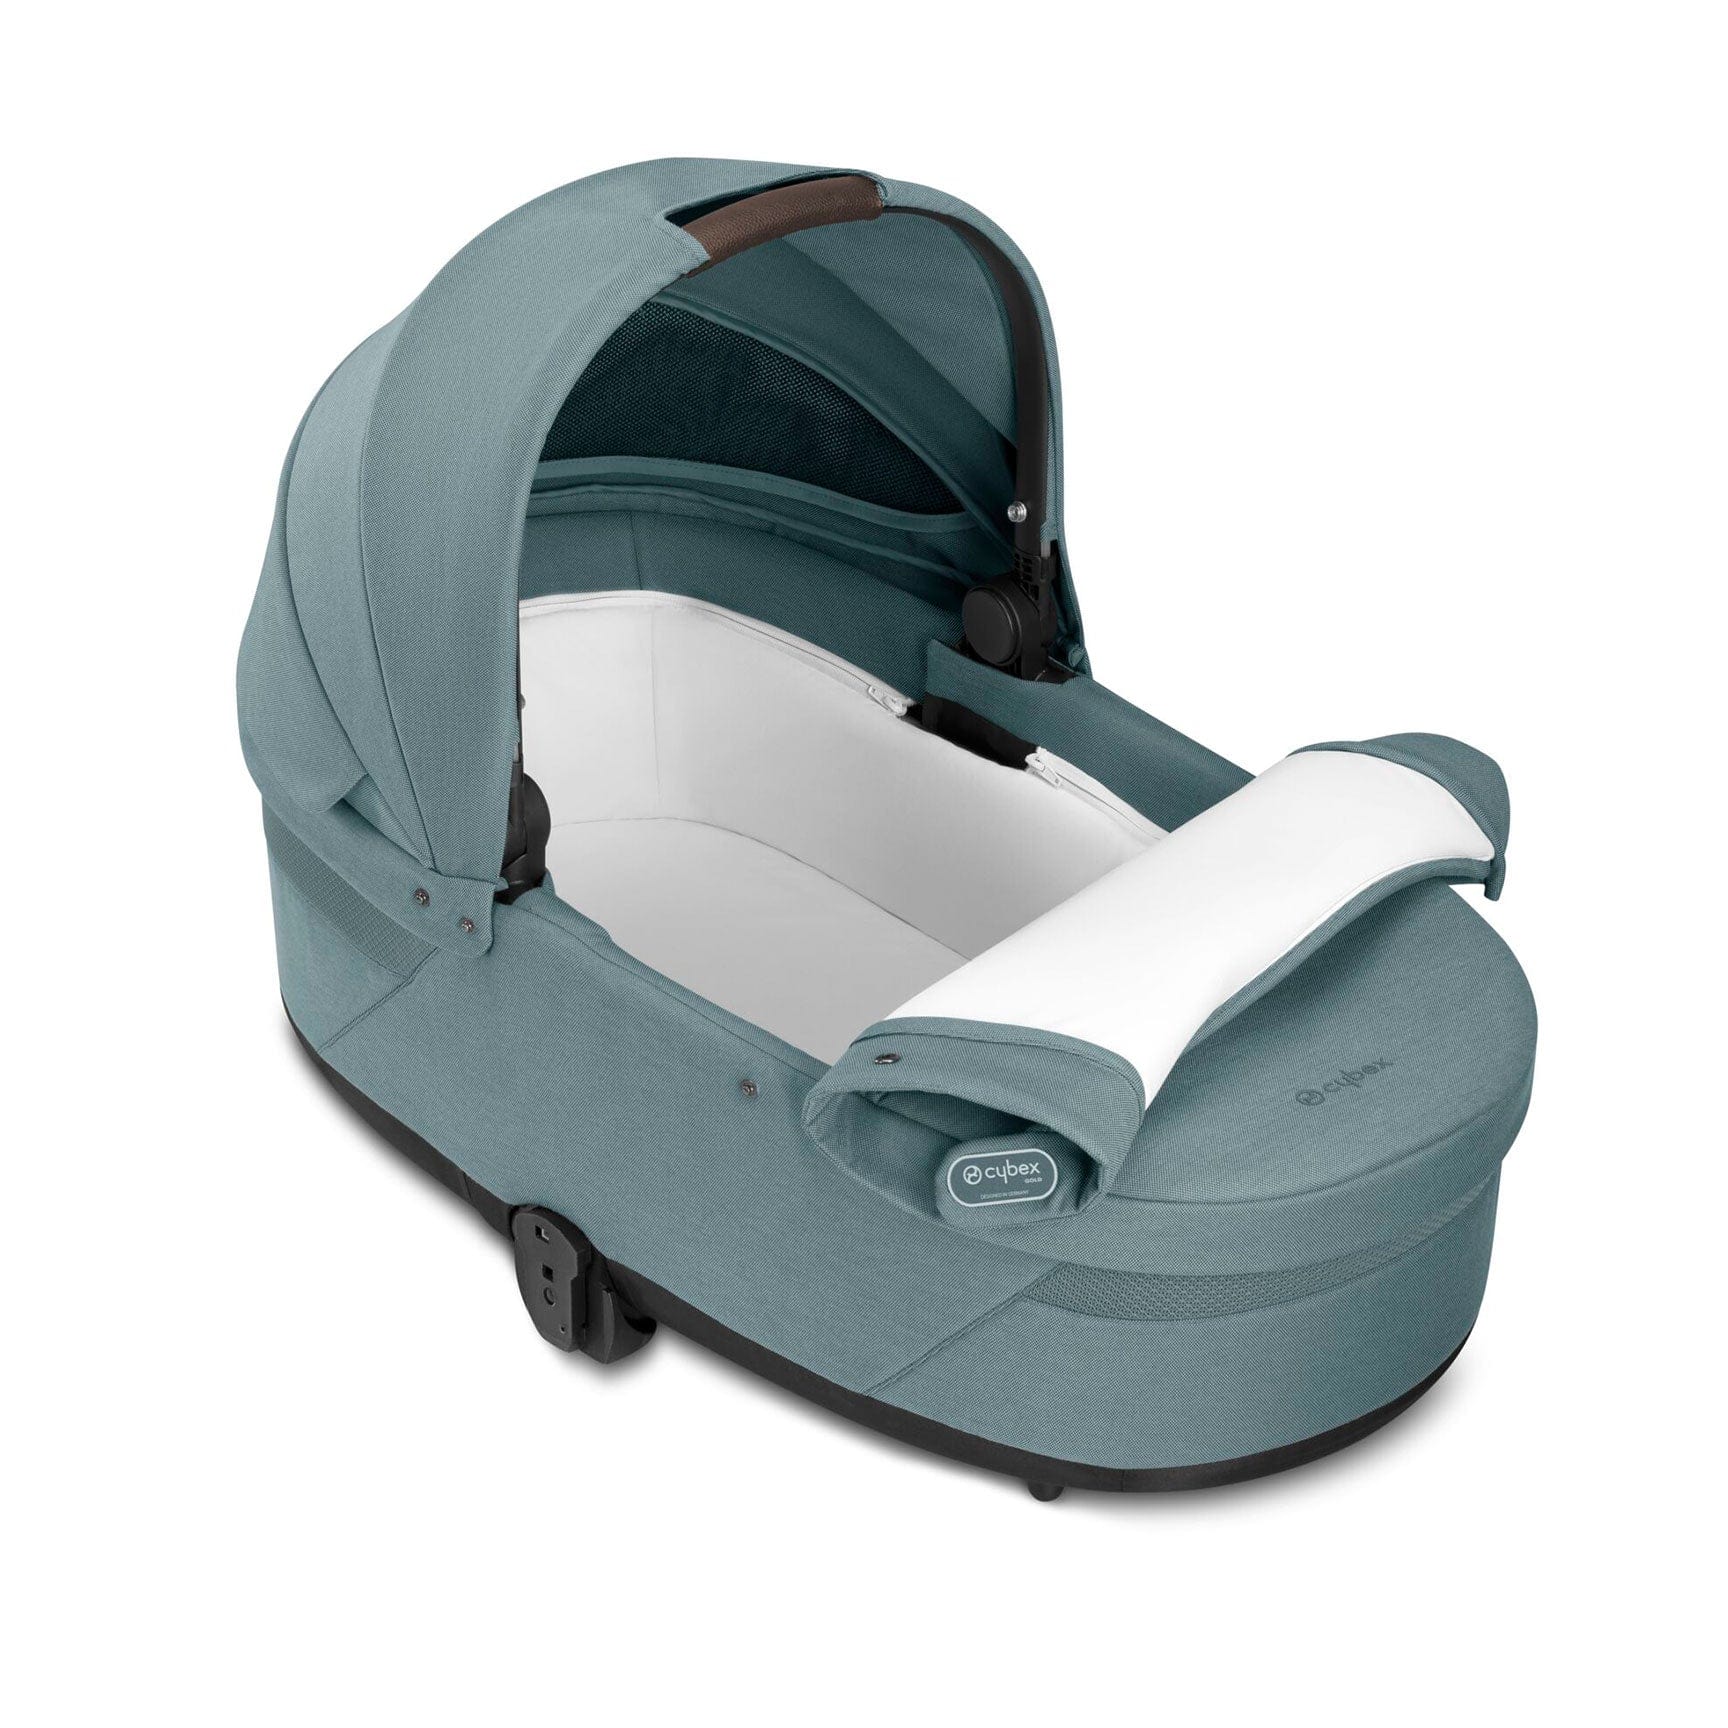 Cybex Balios Comfort Bundle in Taupe/Sky Blue Travel Systems 127458-TPE-SKY-BLU 4063846318049